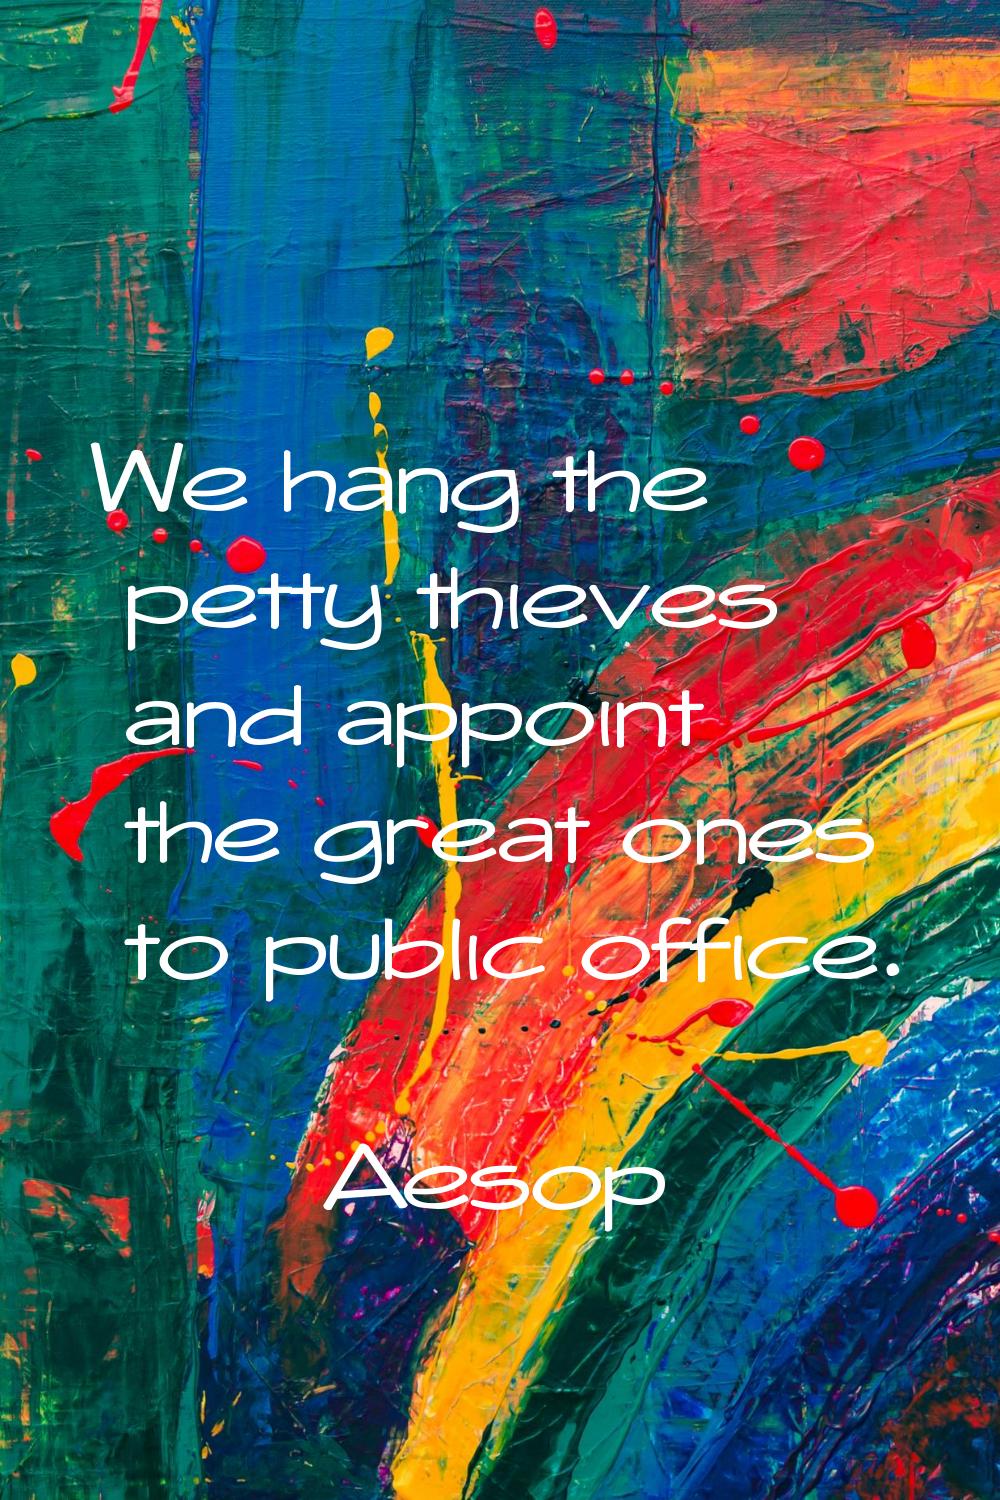 We hang the petty thieves and appoint the great ones to public office.